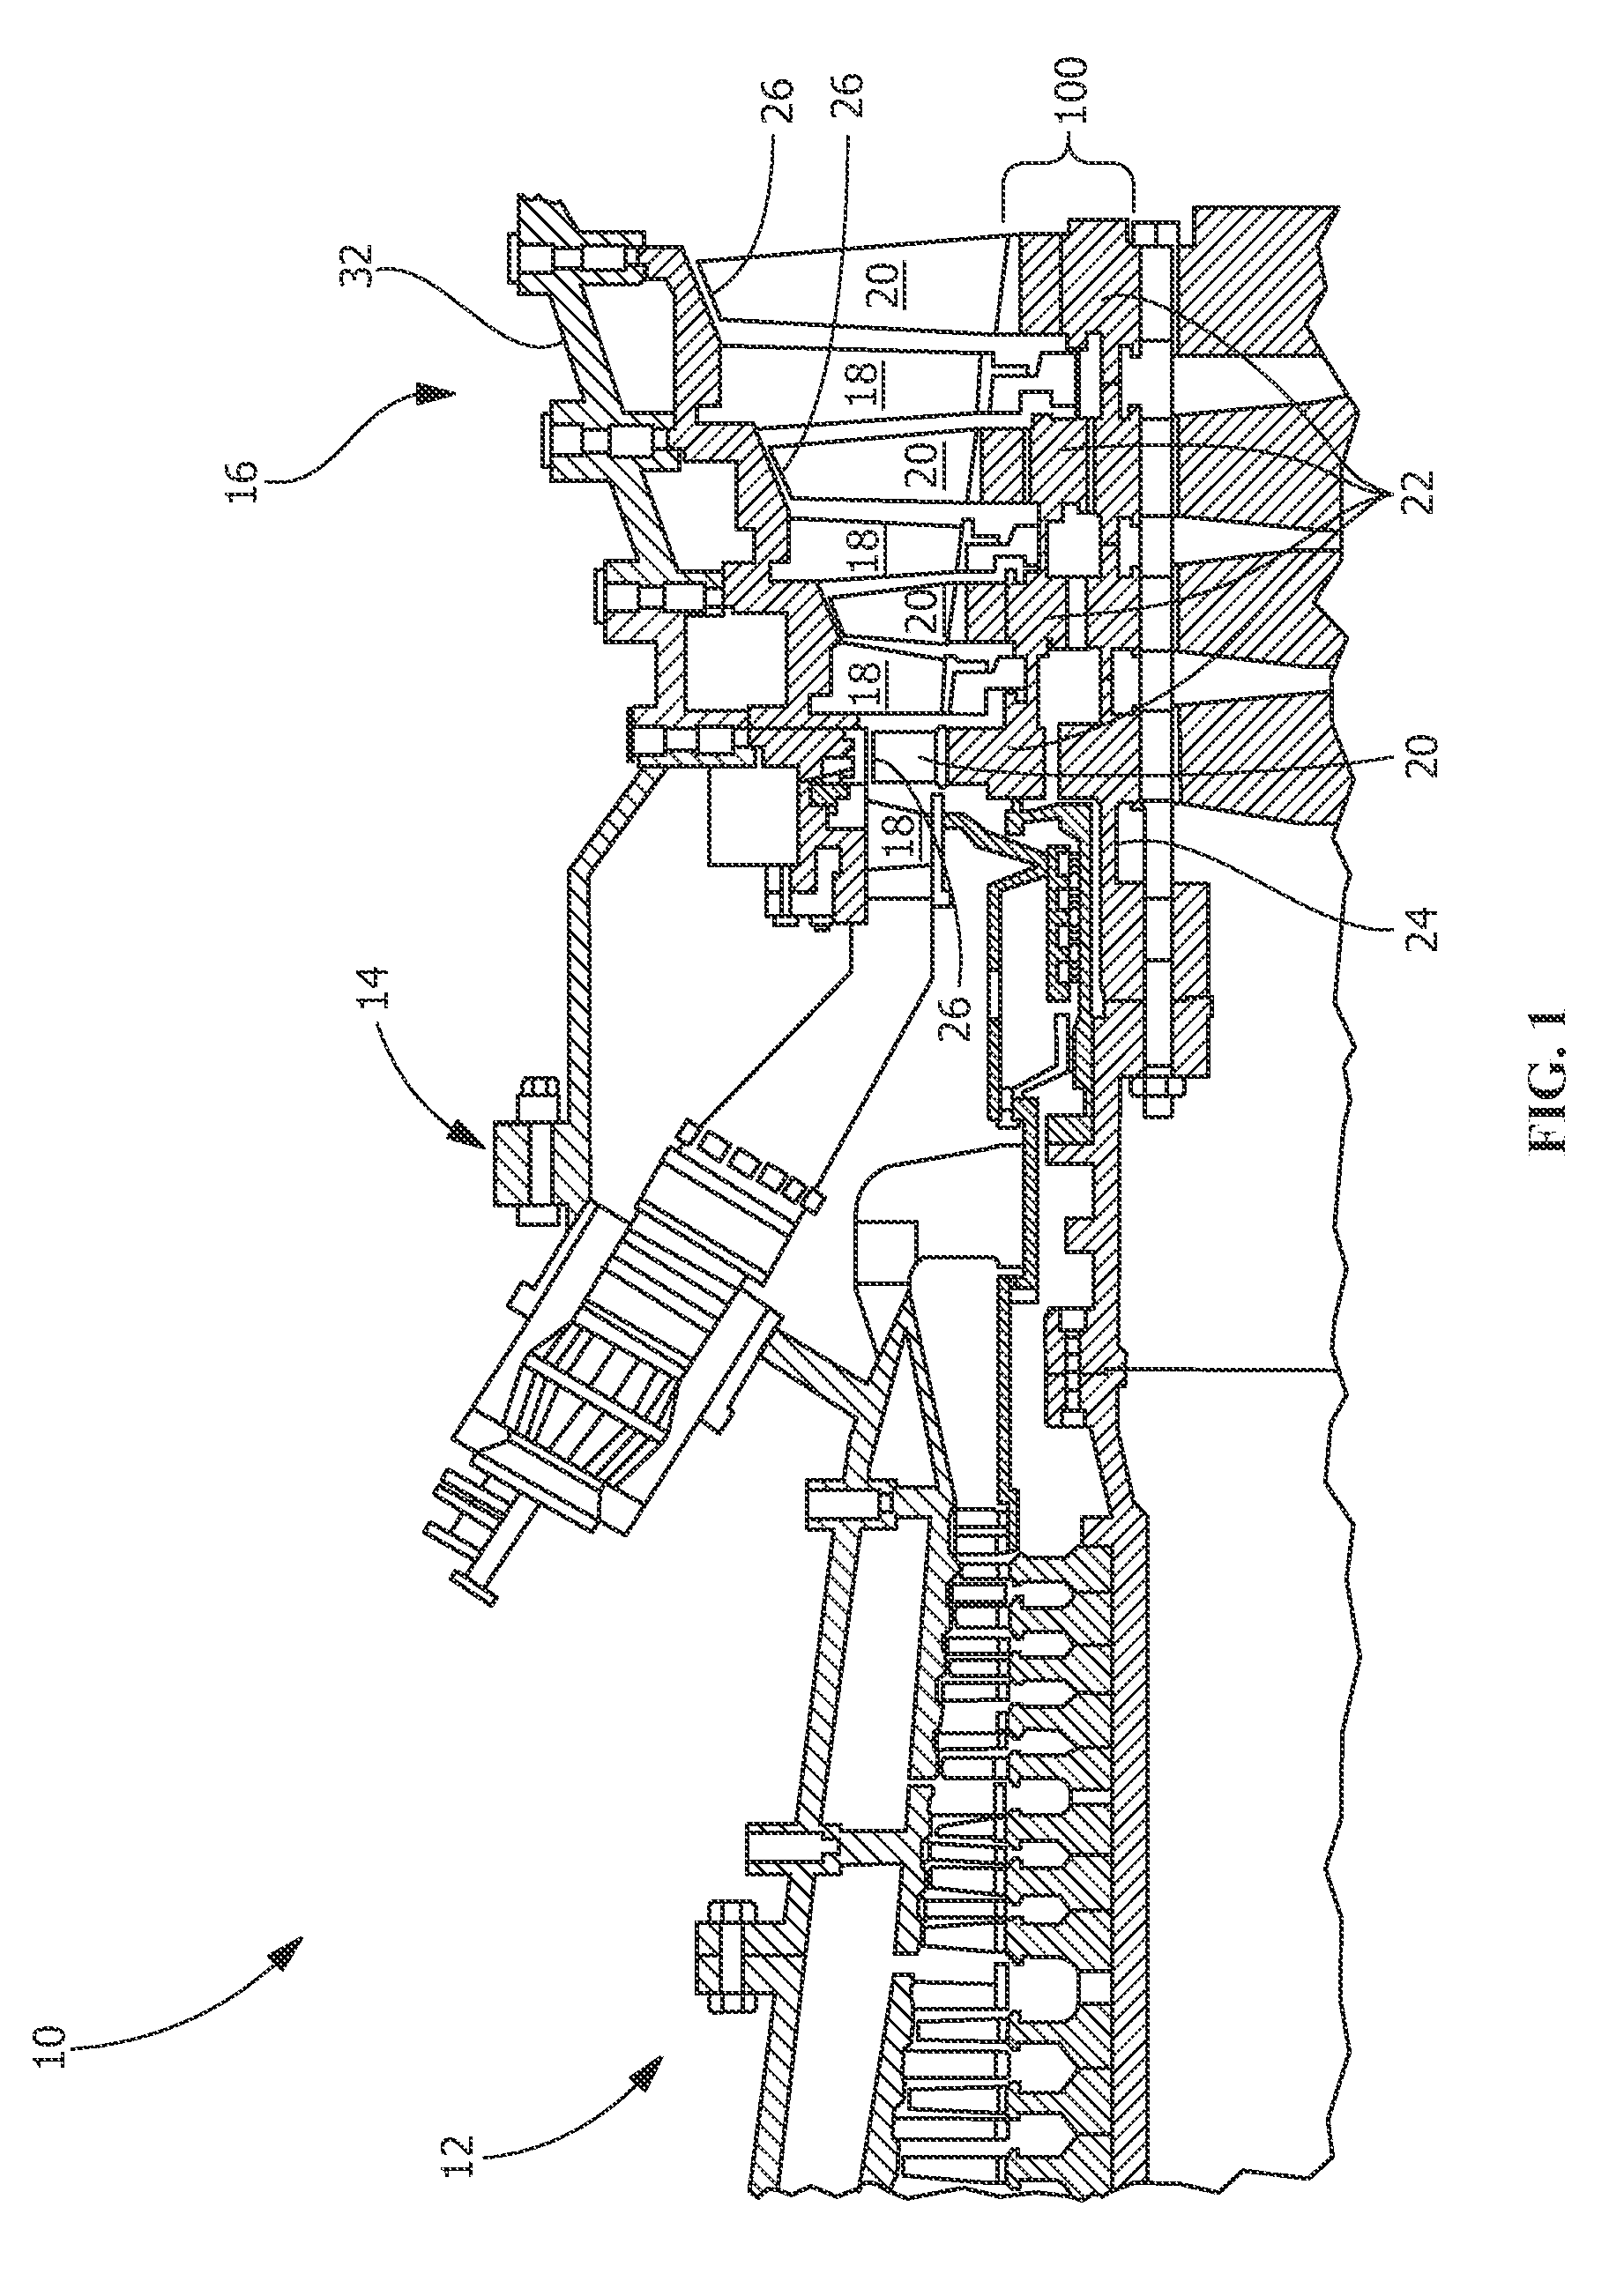 Connecting system for metal components and CMC components, a turbine blade retaining system and a rotating component retaining system